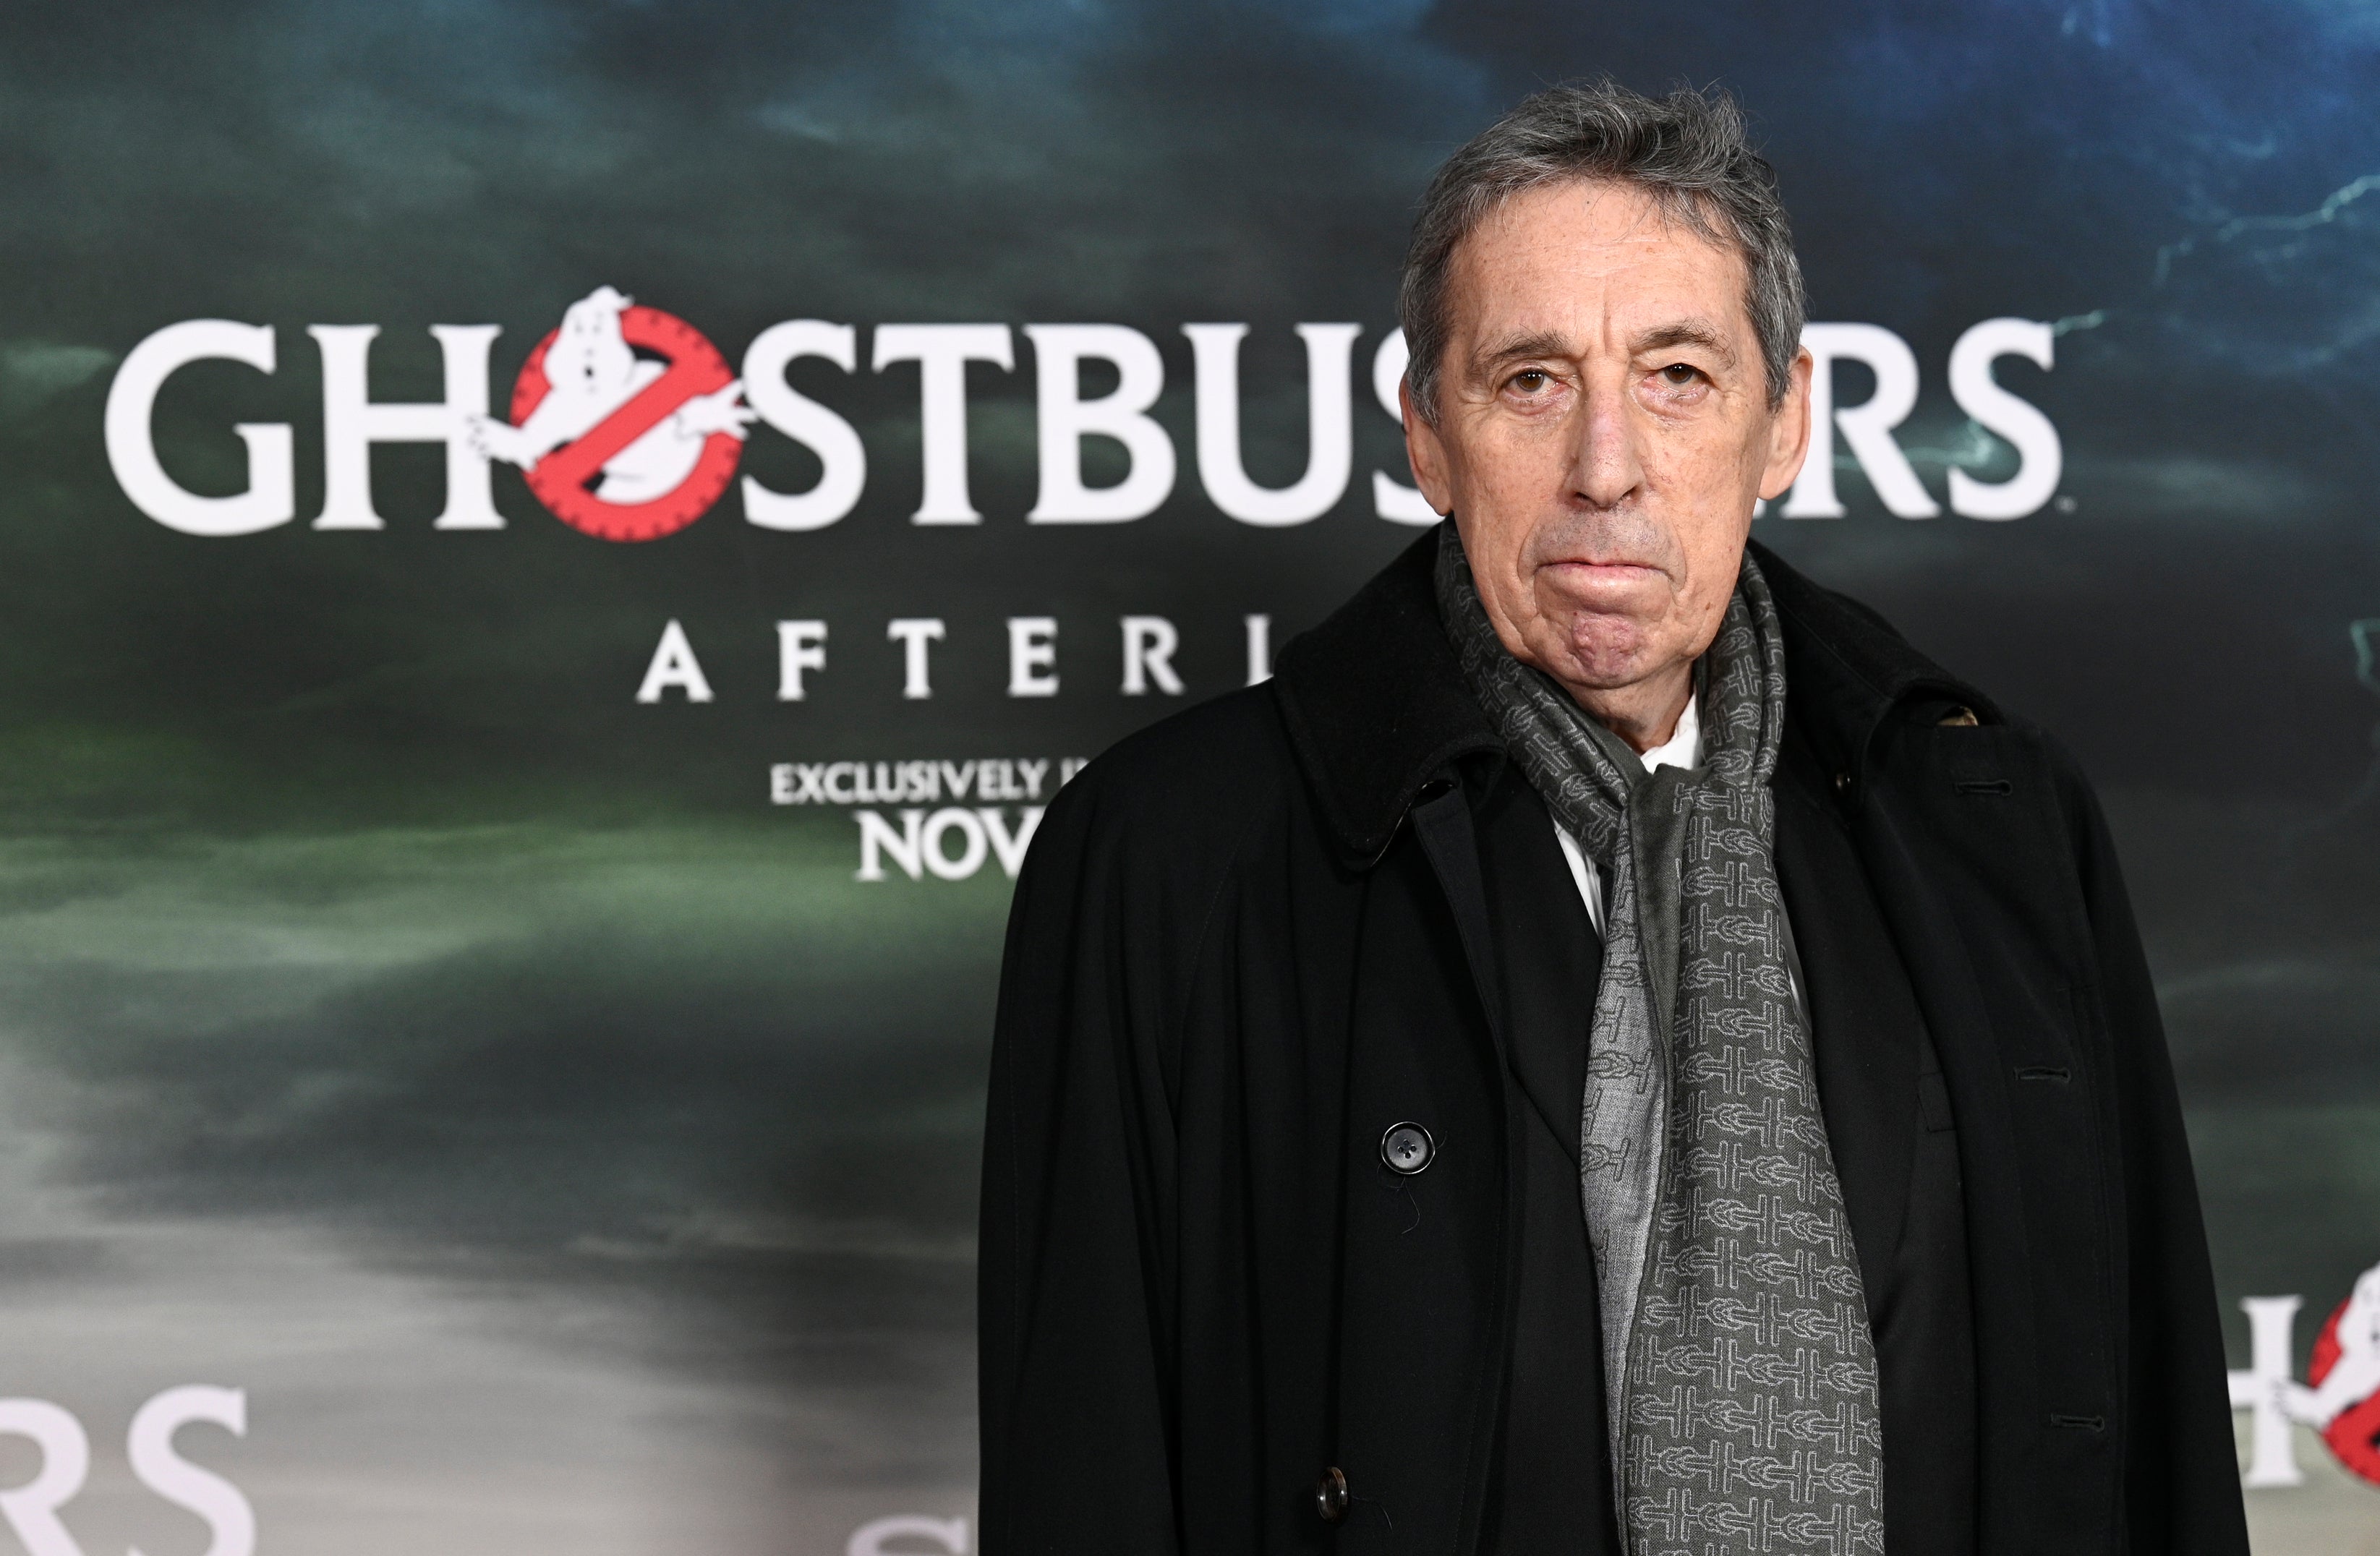 Ivan Reitman at the premiere of Ghostbusters: Afterlife (Evan Agostini/Invision/AP)